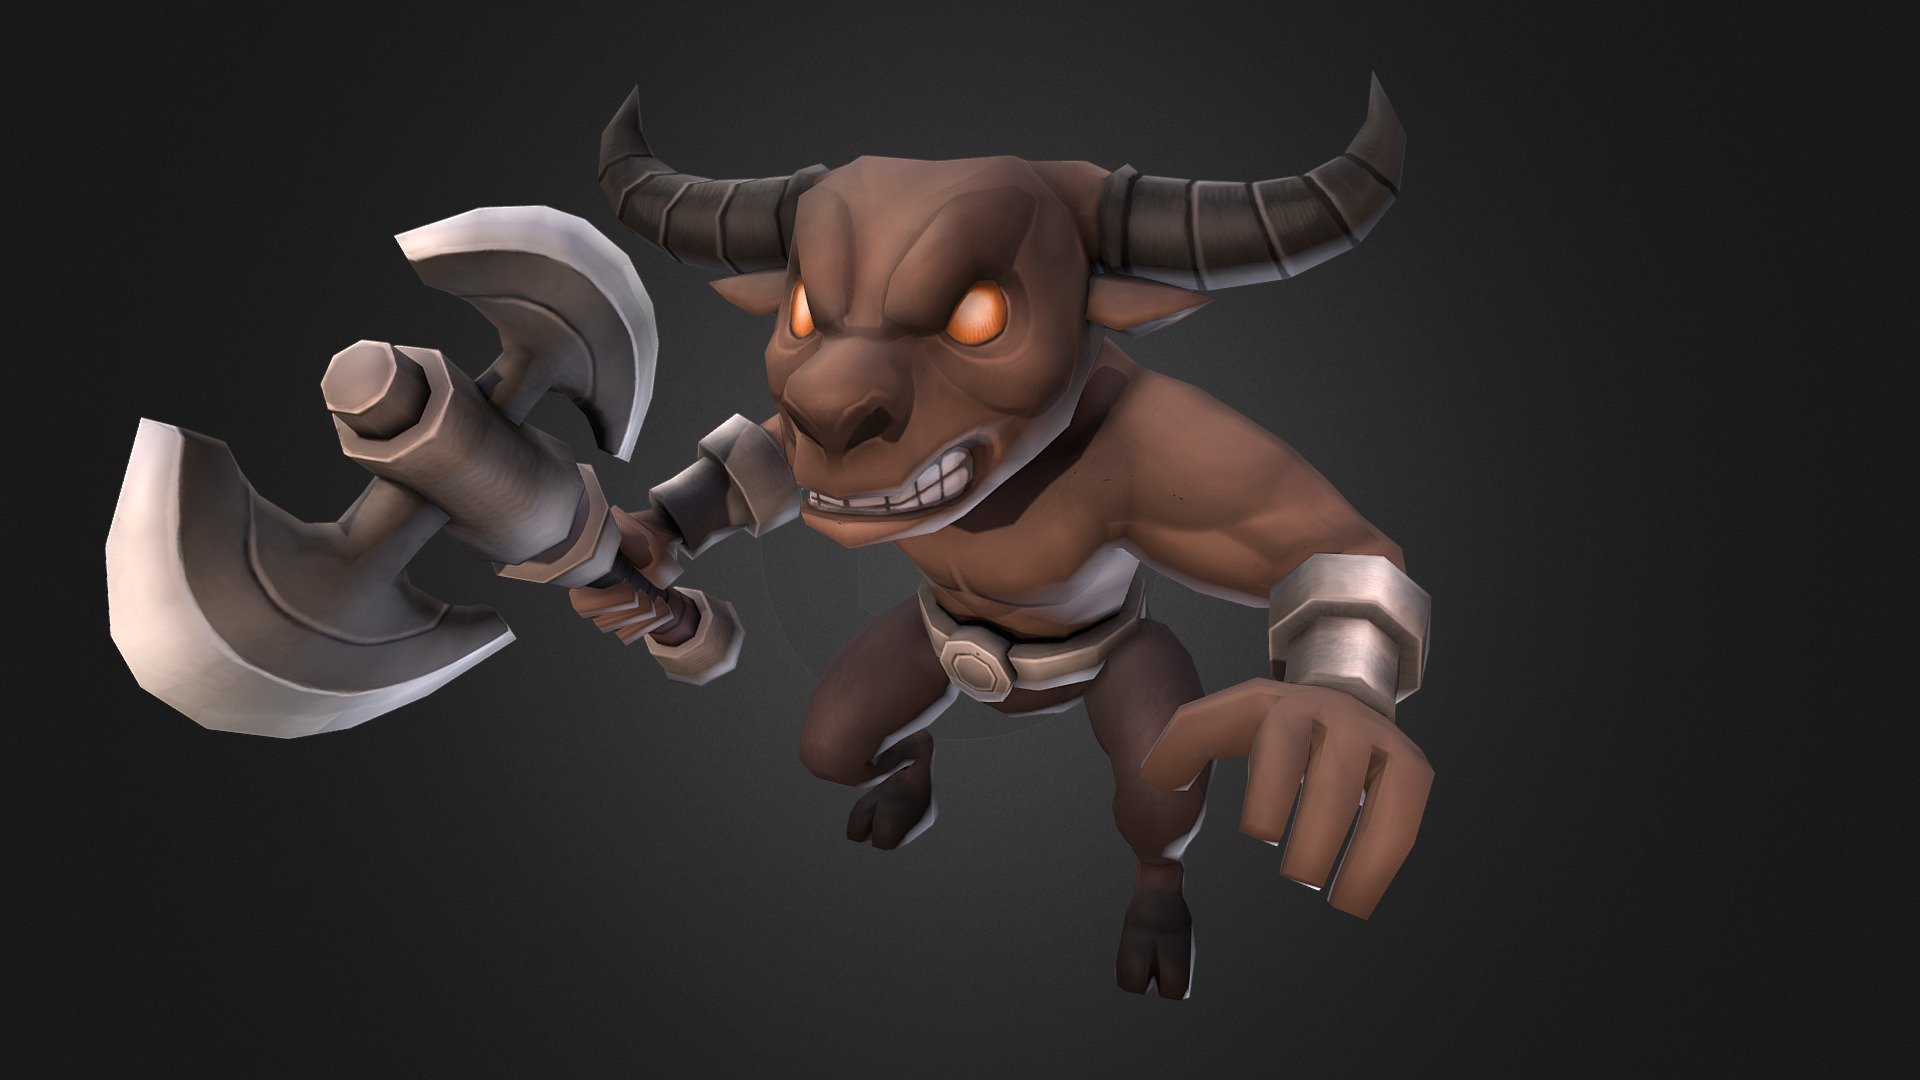 Supported Unity versions 2018.4.8 or higher

Minotaur (1878 vertex)

6 colors textures (2048x2048)

11 basic animations

Idle / Walk / Run / Attack x3 / Damage x2 / Stunned / Die / GetUp

Animation Preview
https://youtu.be/YpKlRbK-Fzc - Poly HP - Minotaur - Buy Royalty Free 3D model by Downrain DC (@downraindc3d) 3d model